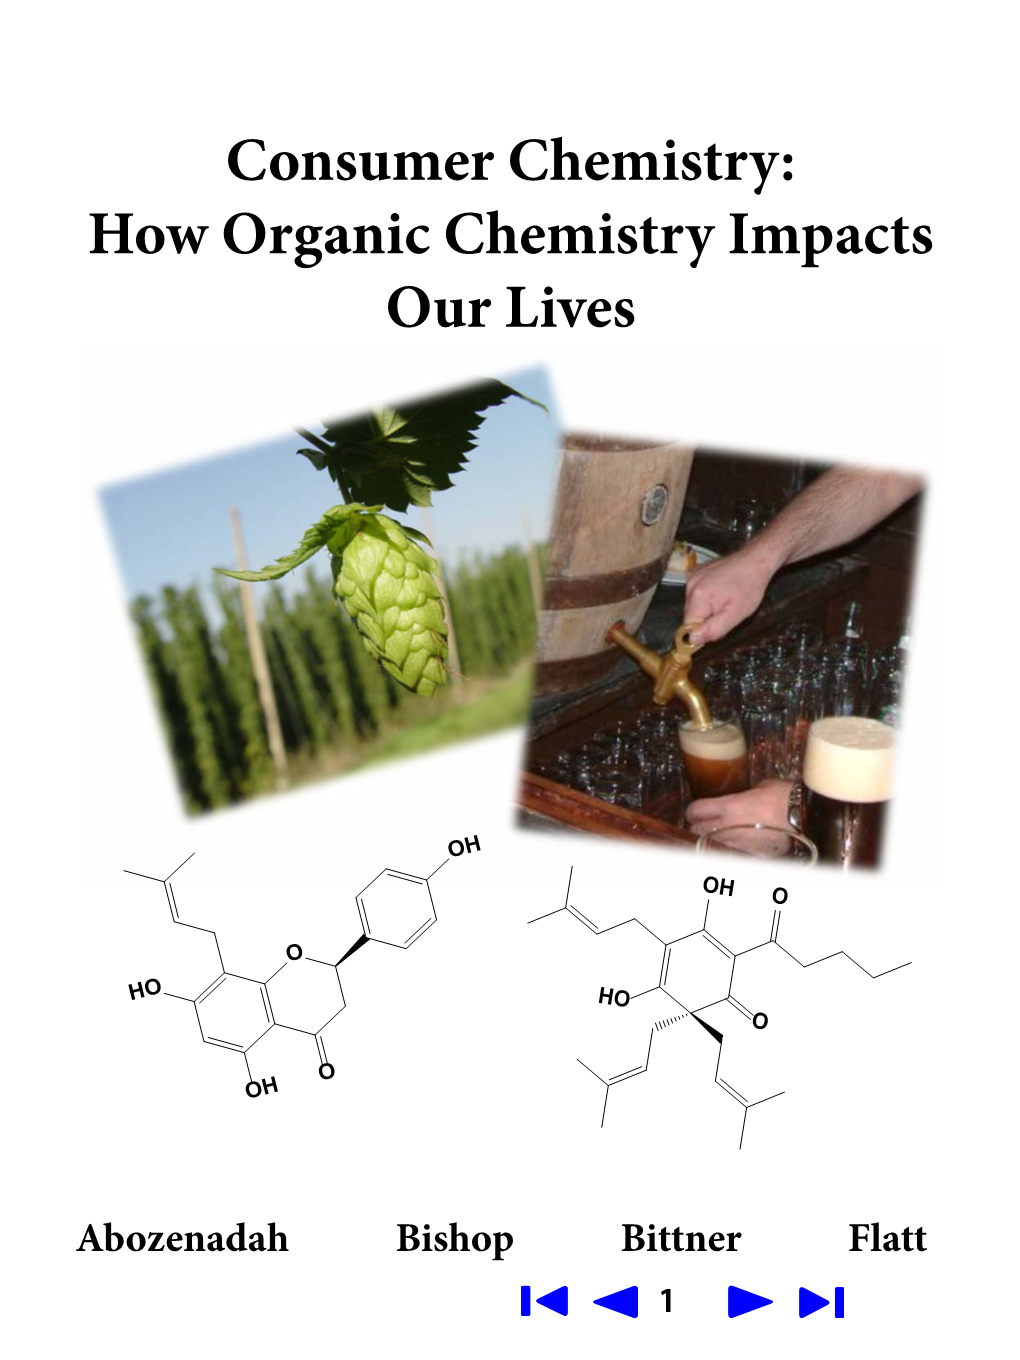 Consumer Chemistry: How Organic Chemistry Impacts Our Lives